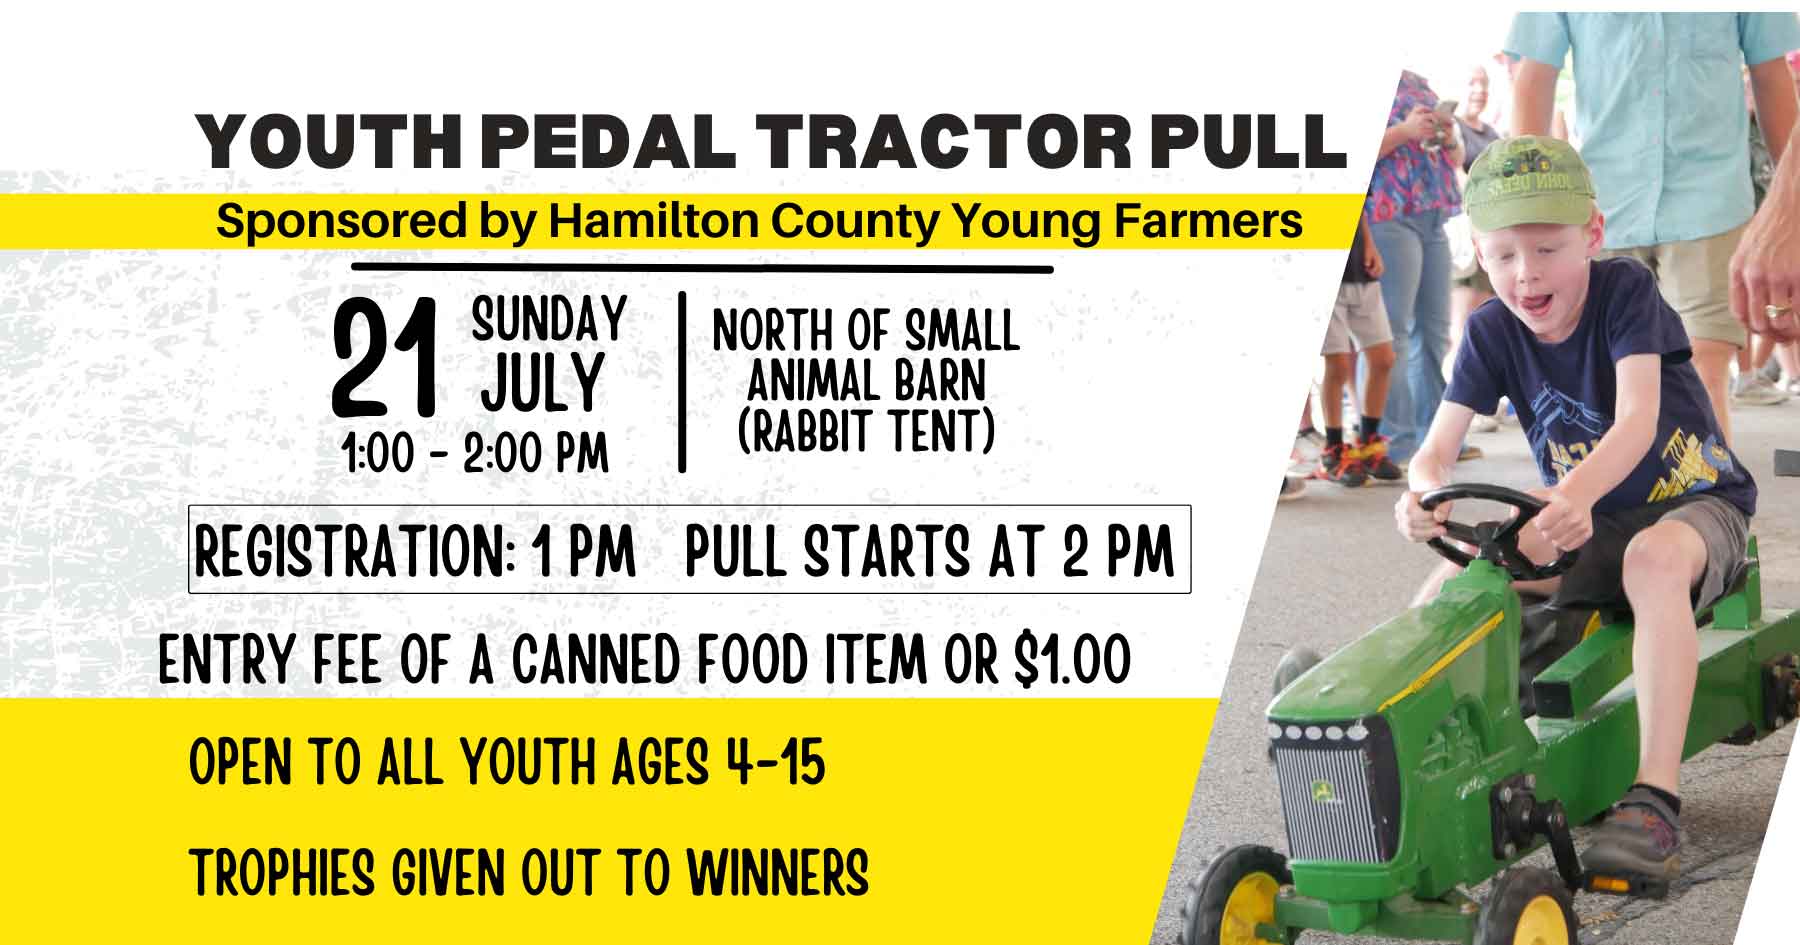 *Pedal Tractor Pull